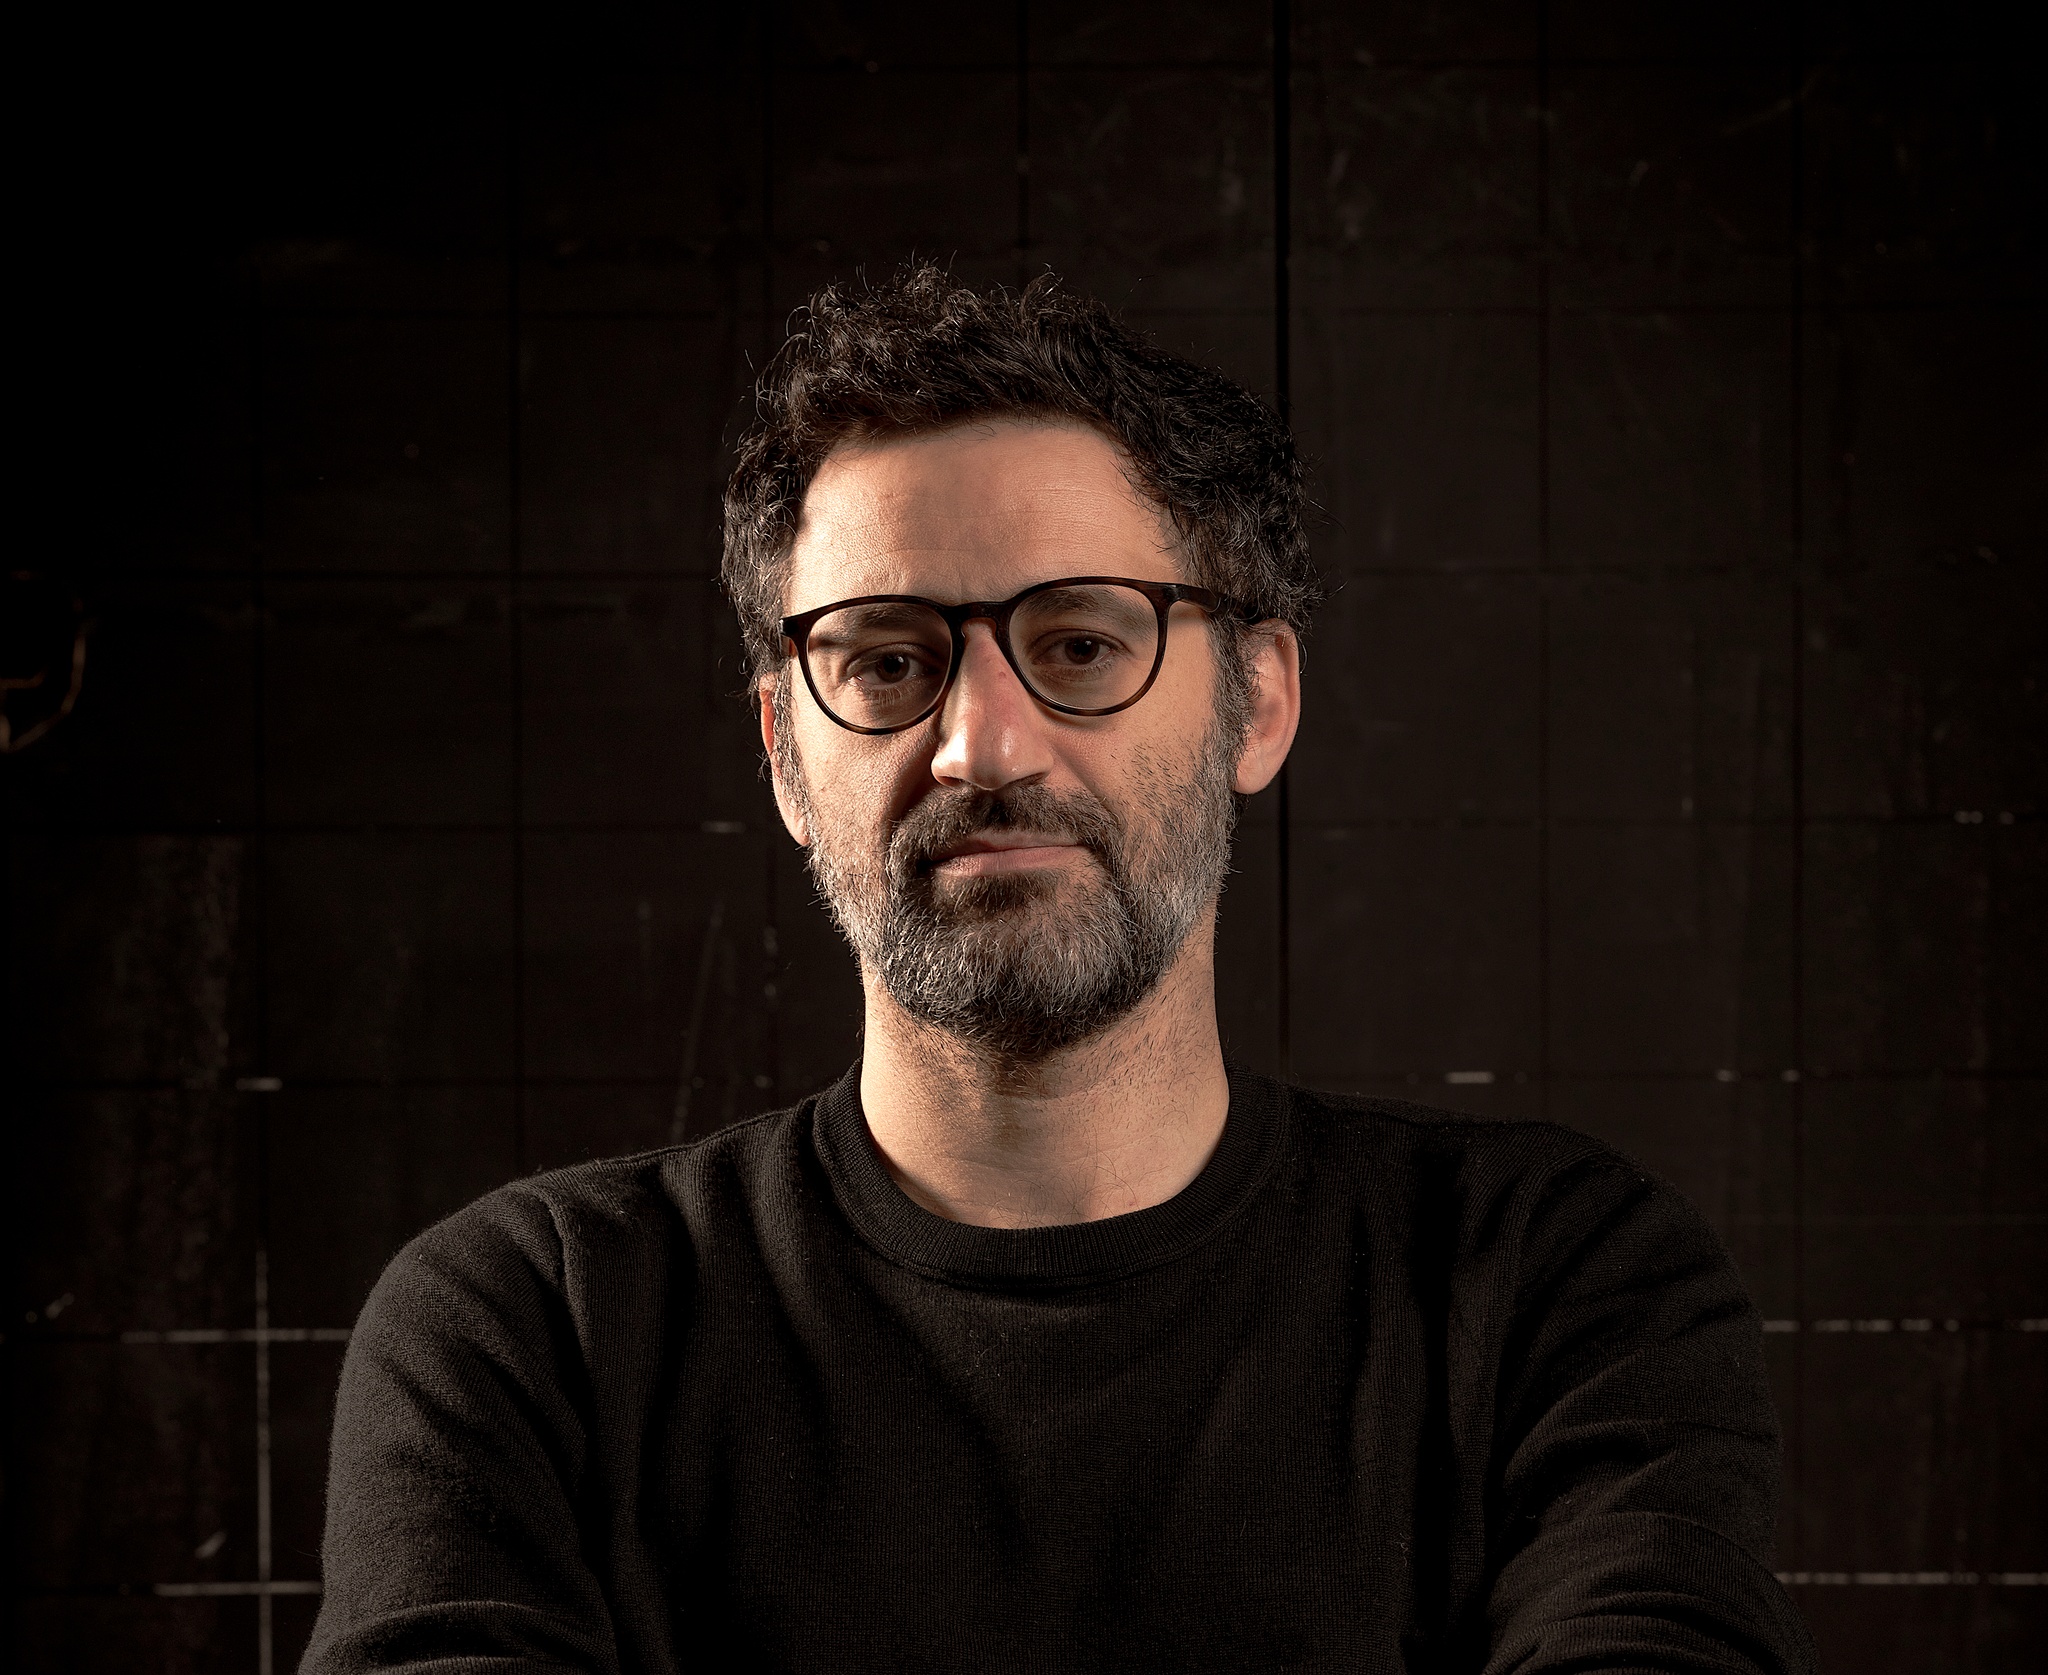 A portrait of director Omar Elerian. He is seen from the shoulders up against a dark background. He wears a dark sweater that blends in to the background. He has a scruffy, short beard, short dark hair, and wears glasses.